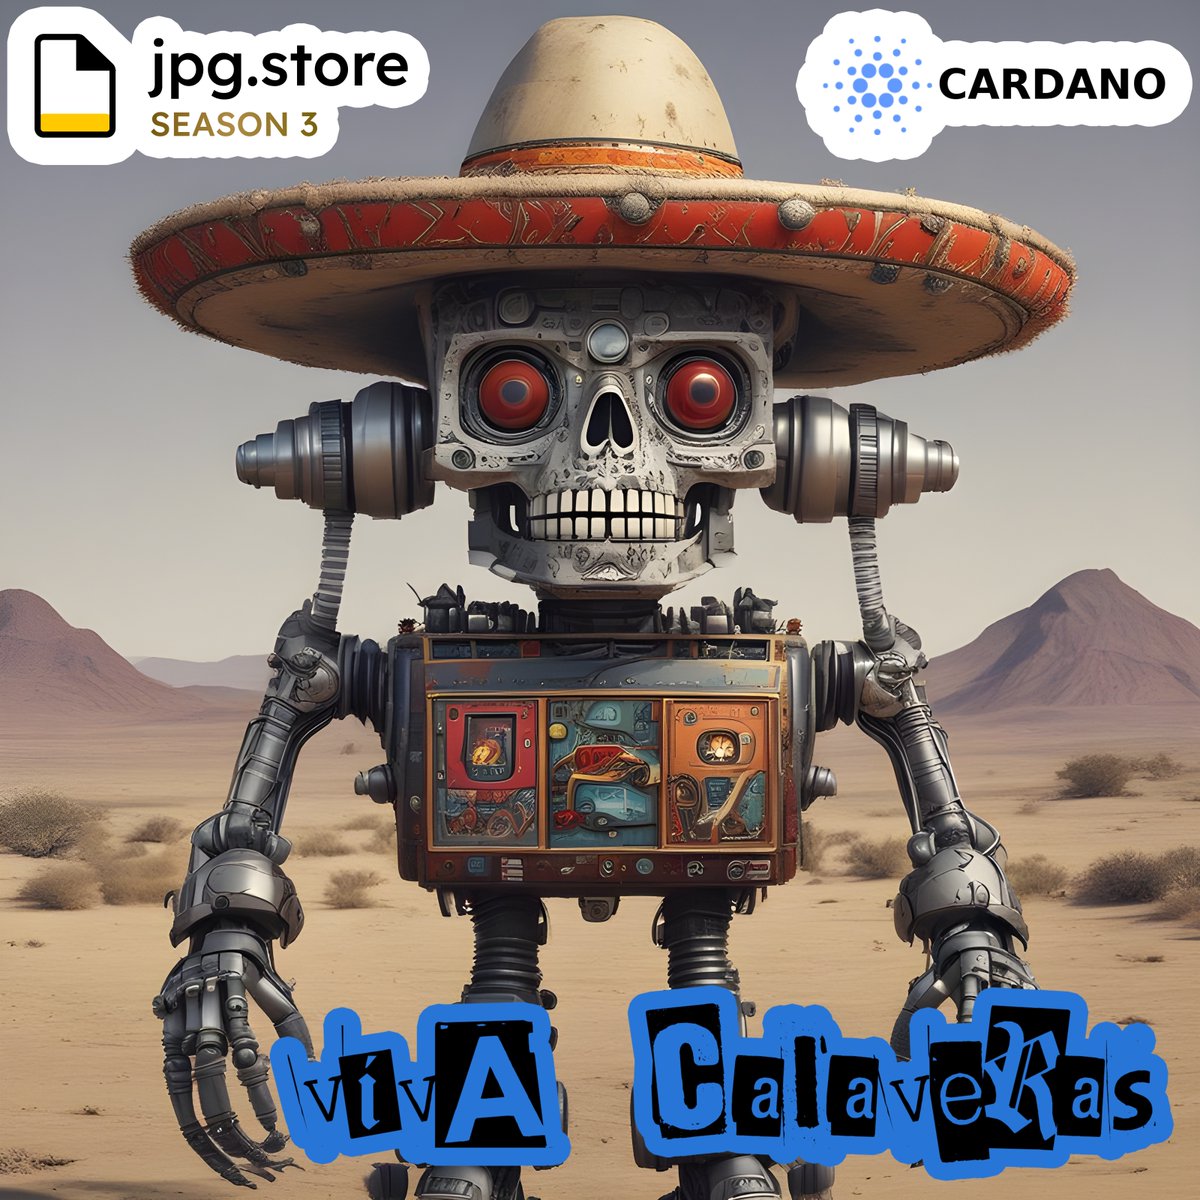 Viva Calaveras on Cardano via jpg.store ! These NFTs can be redeemed for a signed 3D printed K-SCOPES® Trading Card.

Gomez
jpg.store/listing/226772…

#cardano #ADA #CardanoNFT #NFT #vivacalaveras #calaveras #kscopes #tradingcards #3dprinting #AI #AImusic